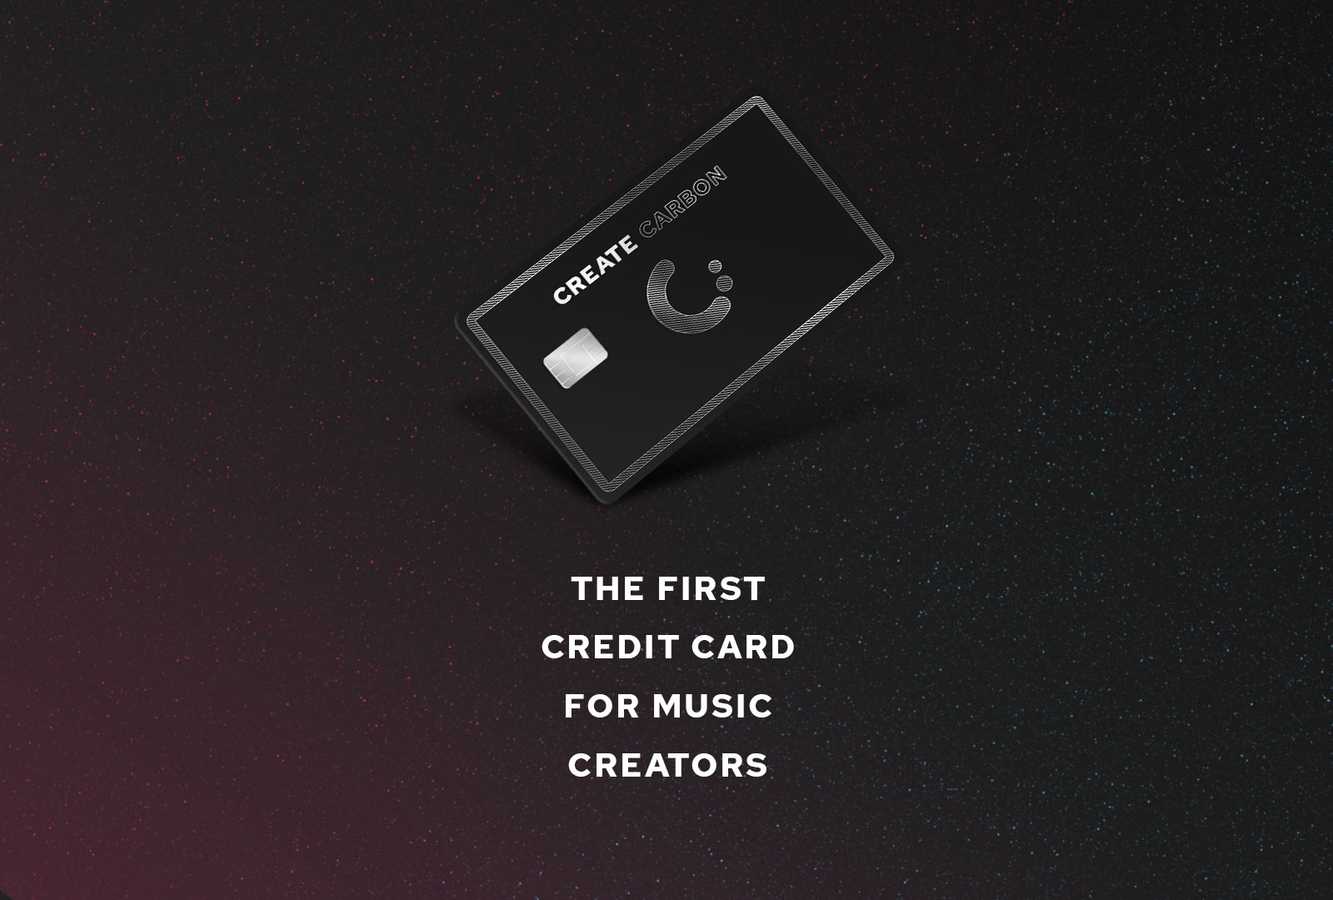 Introducing Create Carbon, the First Credit Card for Artists and Creators